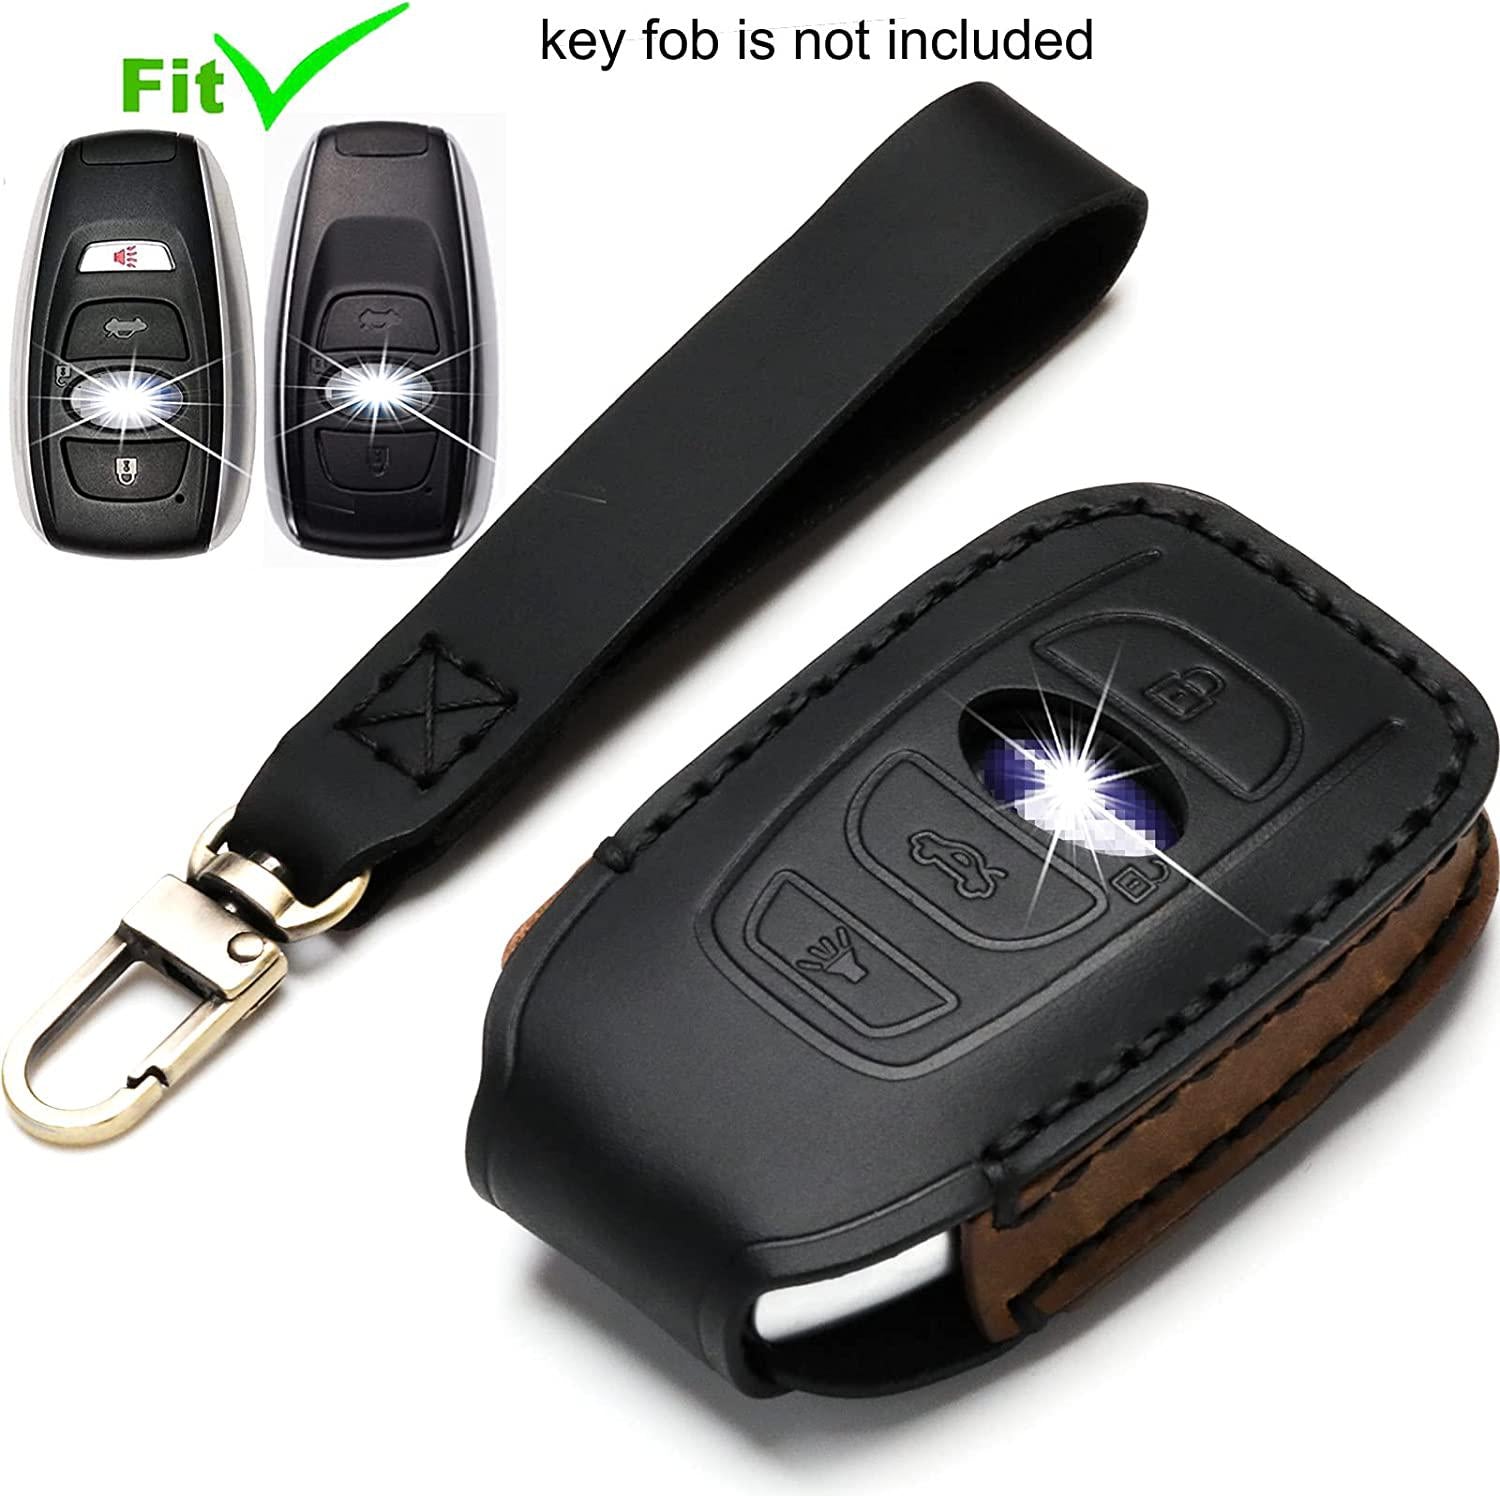 ZiHafate, Leather Subaru Dedicated Cover Key Fob Case, Suit for Keyless Remote Control for Subaru Forester, Impreza, Outback, WRX, BRZ, Legacy, and XV Crosstrek etc. (A-Black)